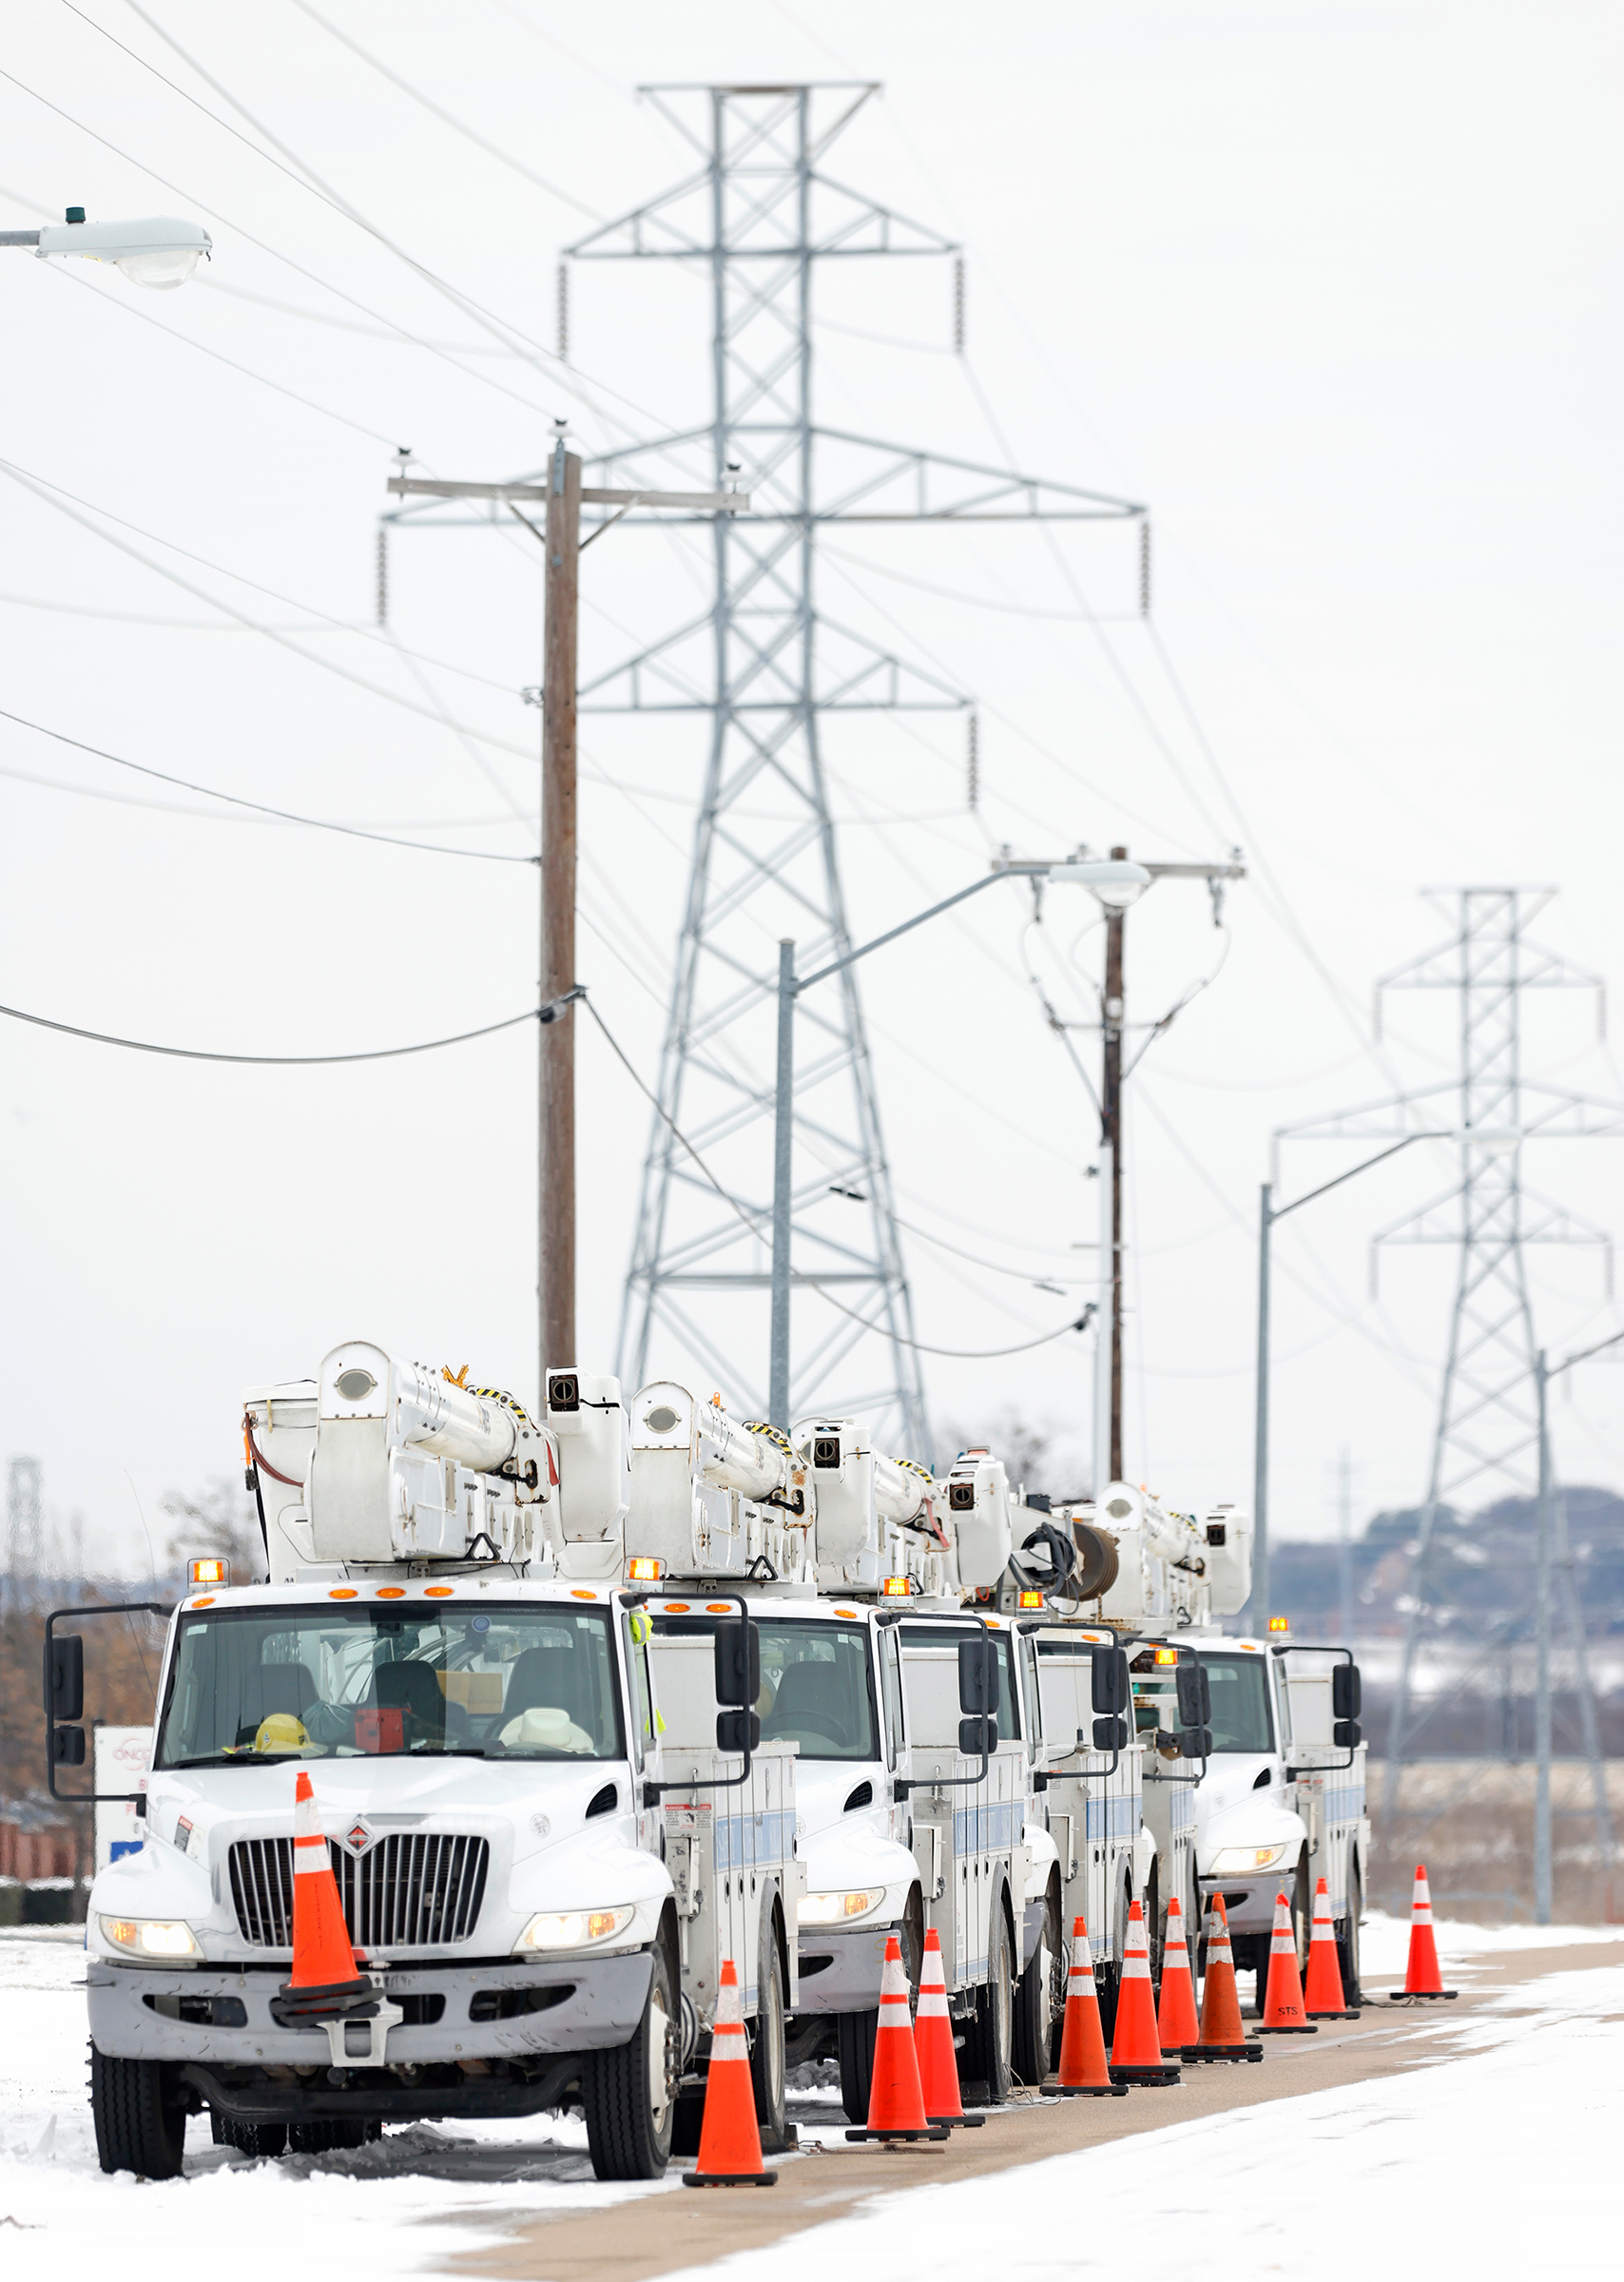 Electric service trucks line up in Fort Worth after a snowstorm left millions of Texans without power (Ron Jenkins—Getty Images)